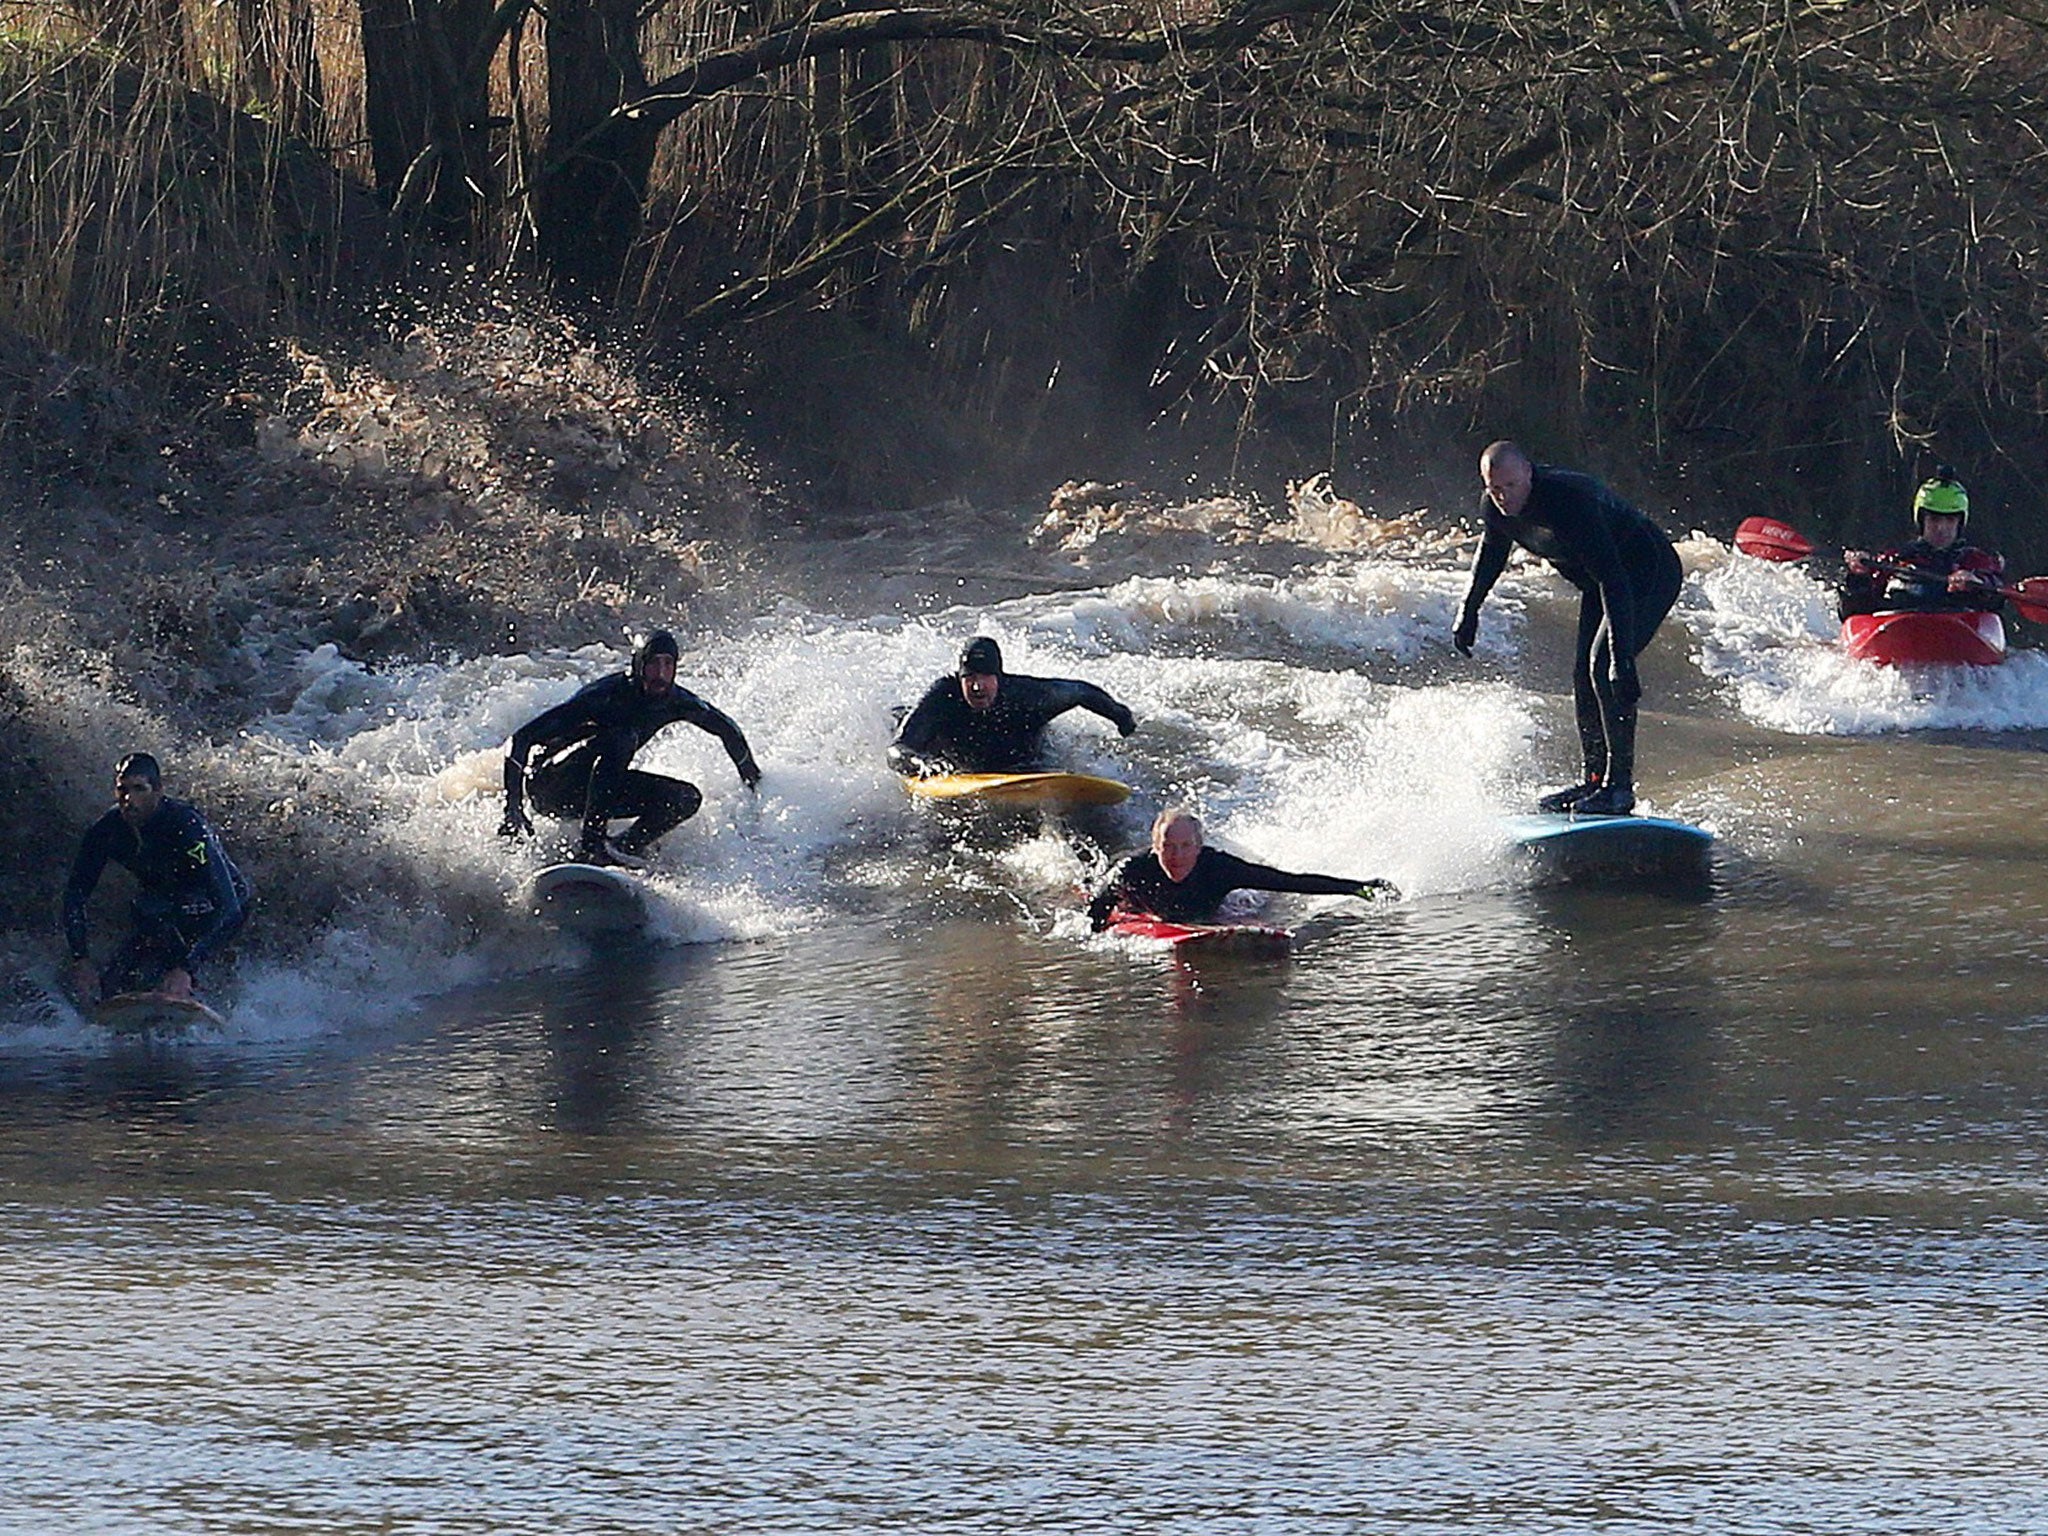 Surfers and kayakers surfing the tidal bore this weekend